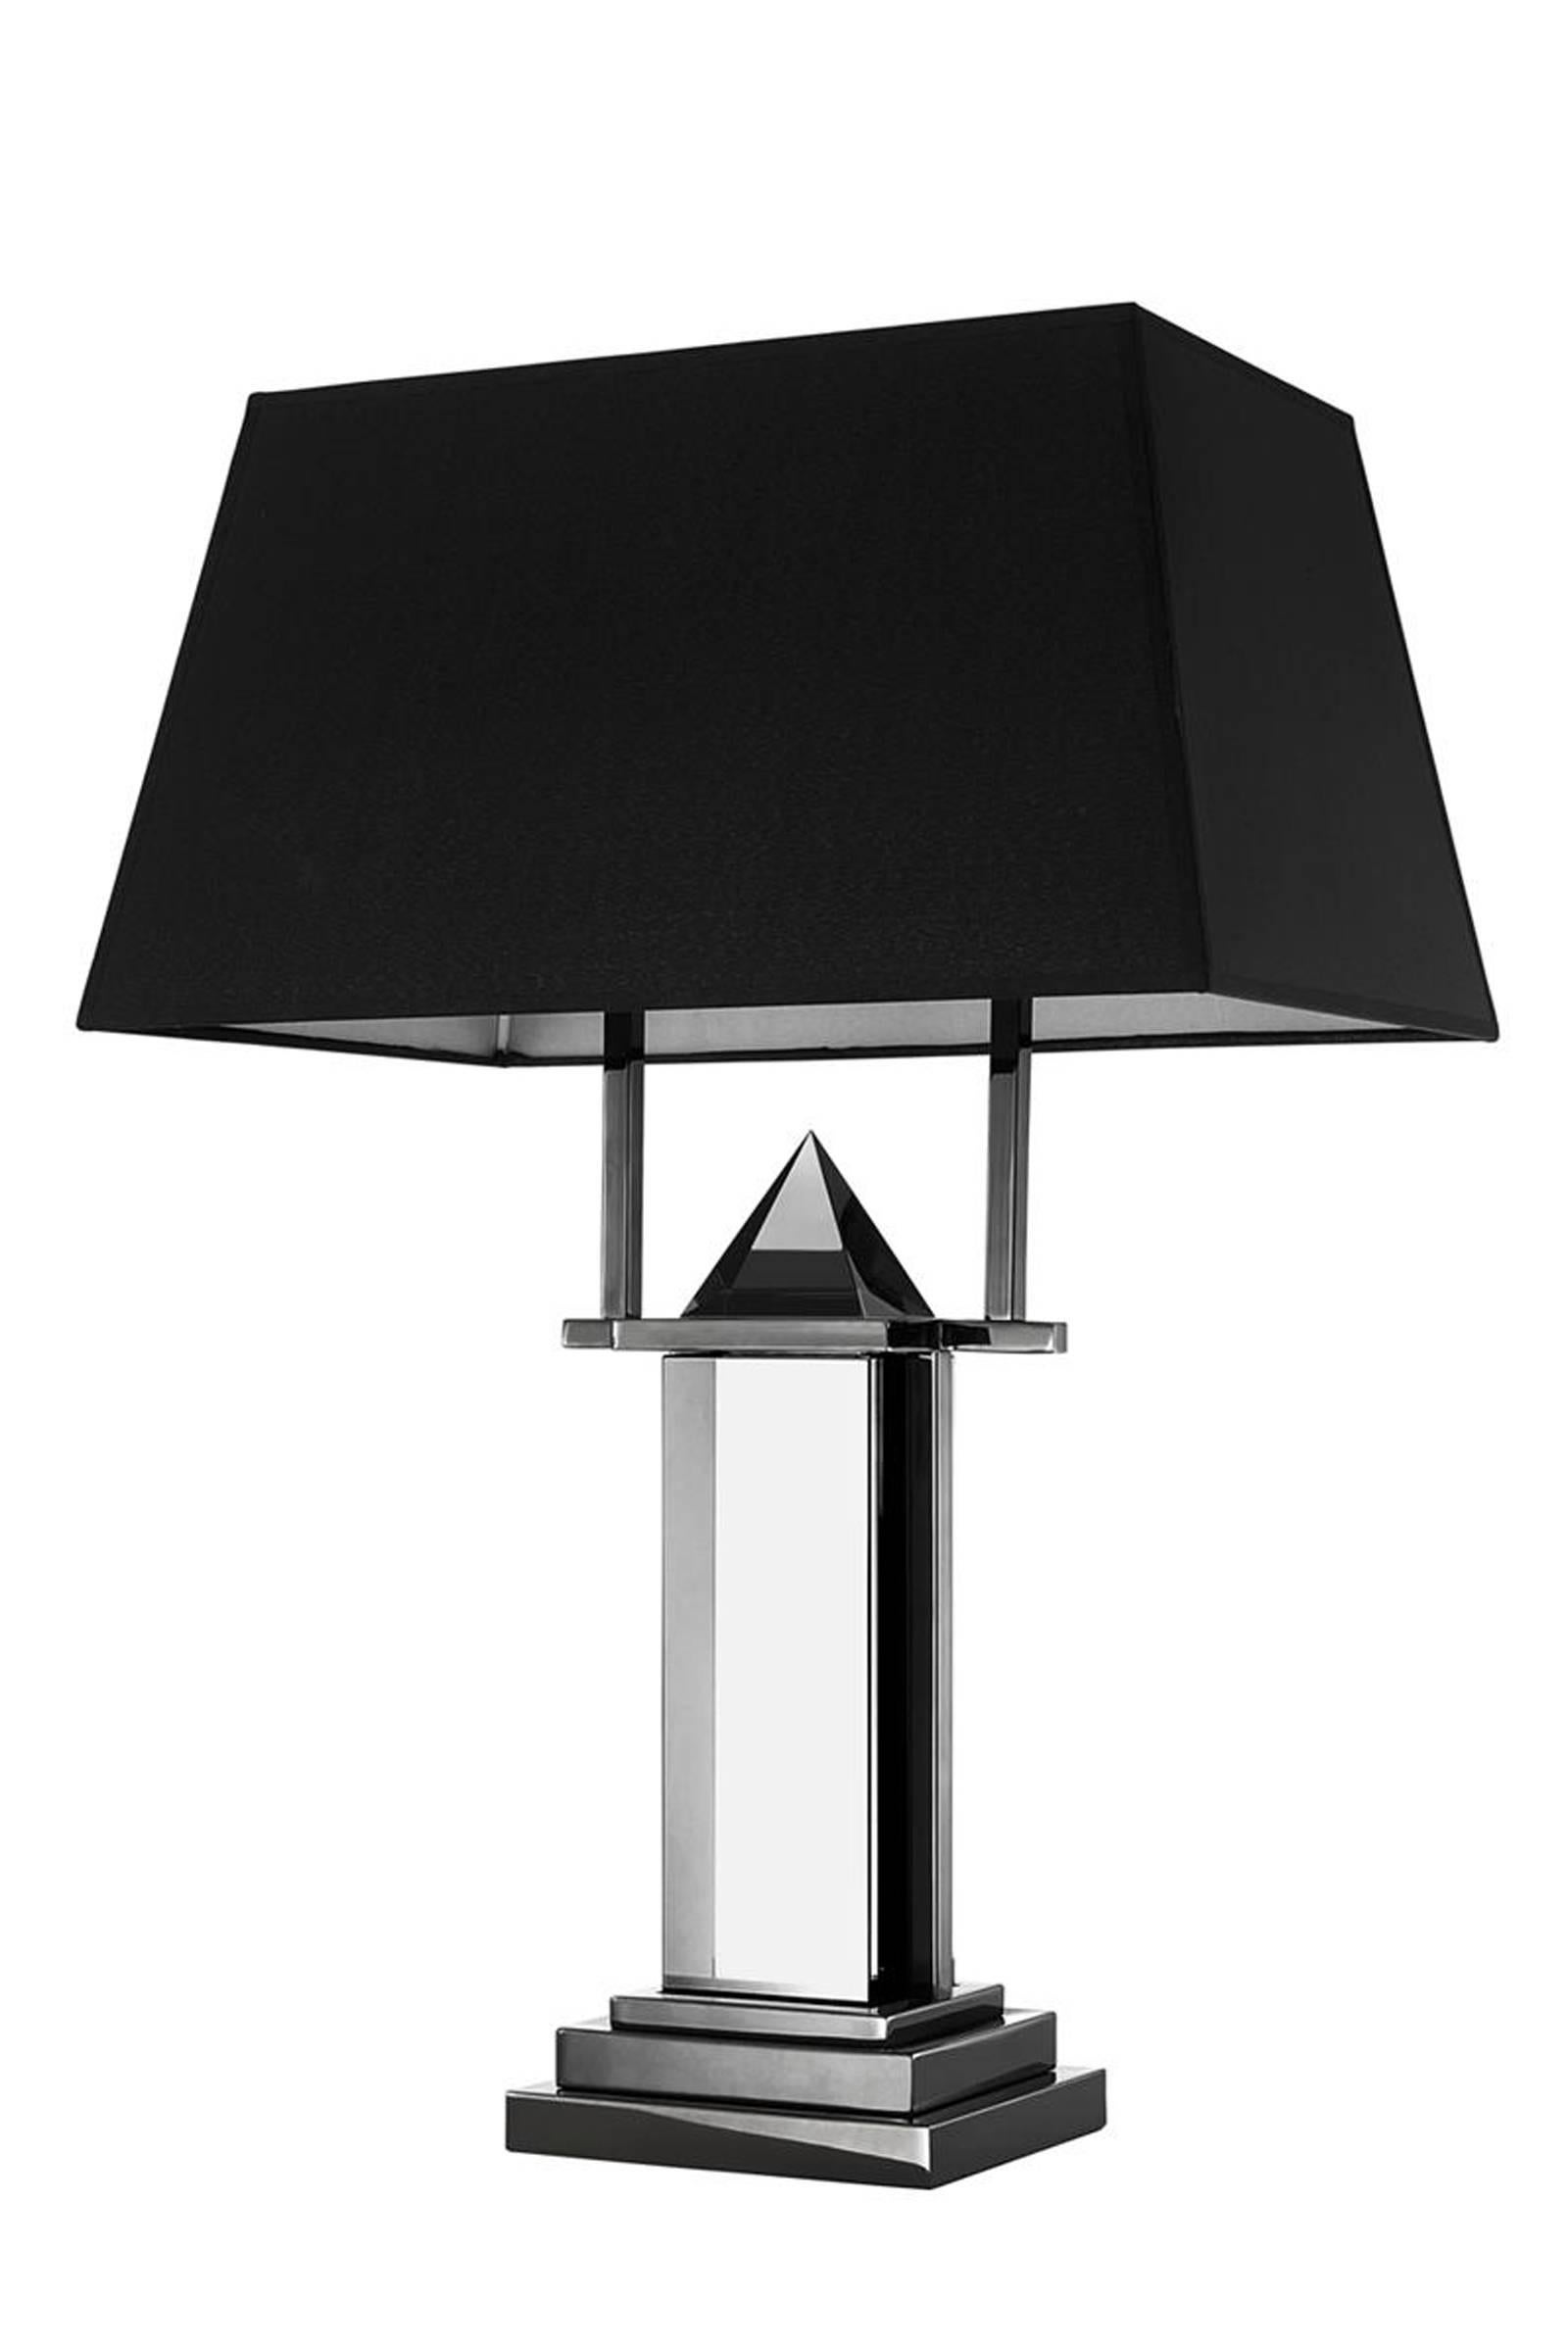 Table lamp diamant in smoked crystal glass
with black nickel finish. Including black shade.
Two lamp holder type E27. Max wattage 60 watt.
.
   